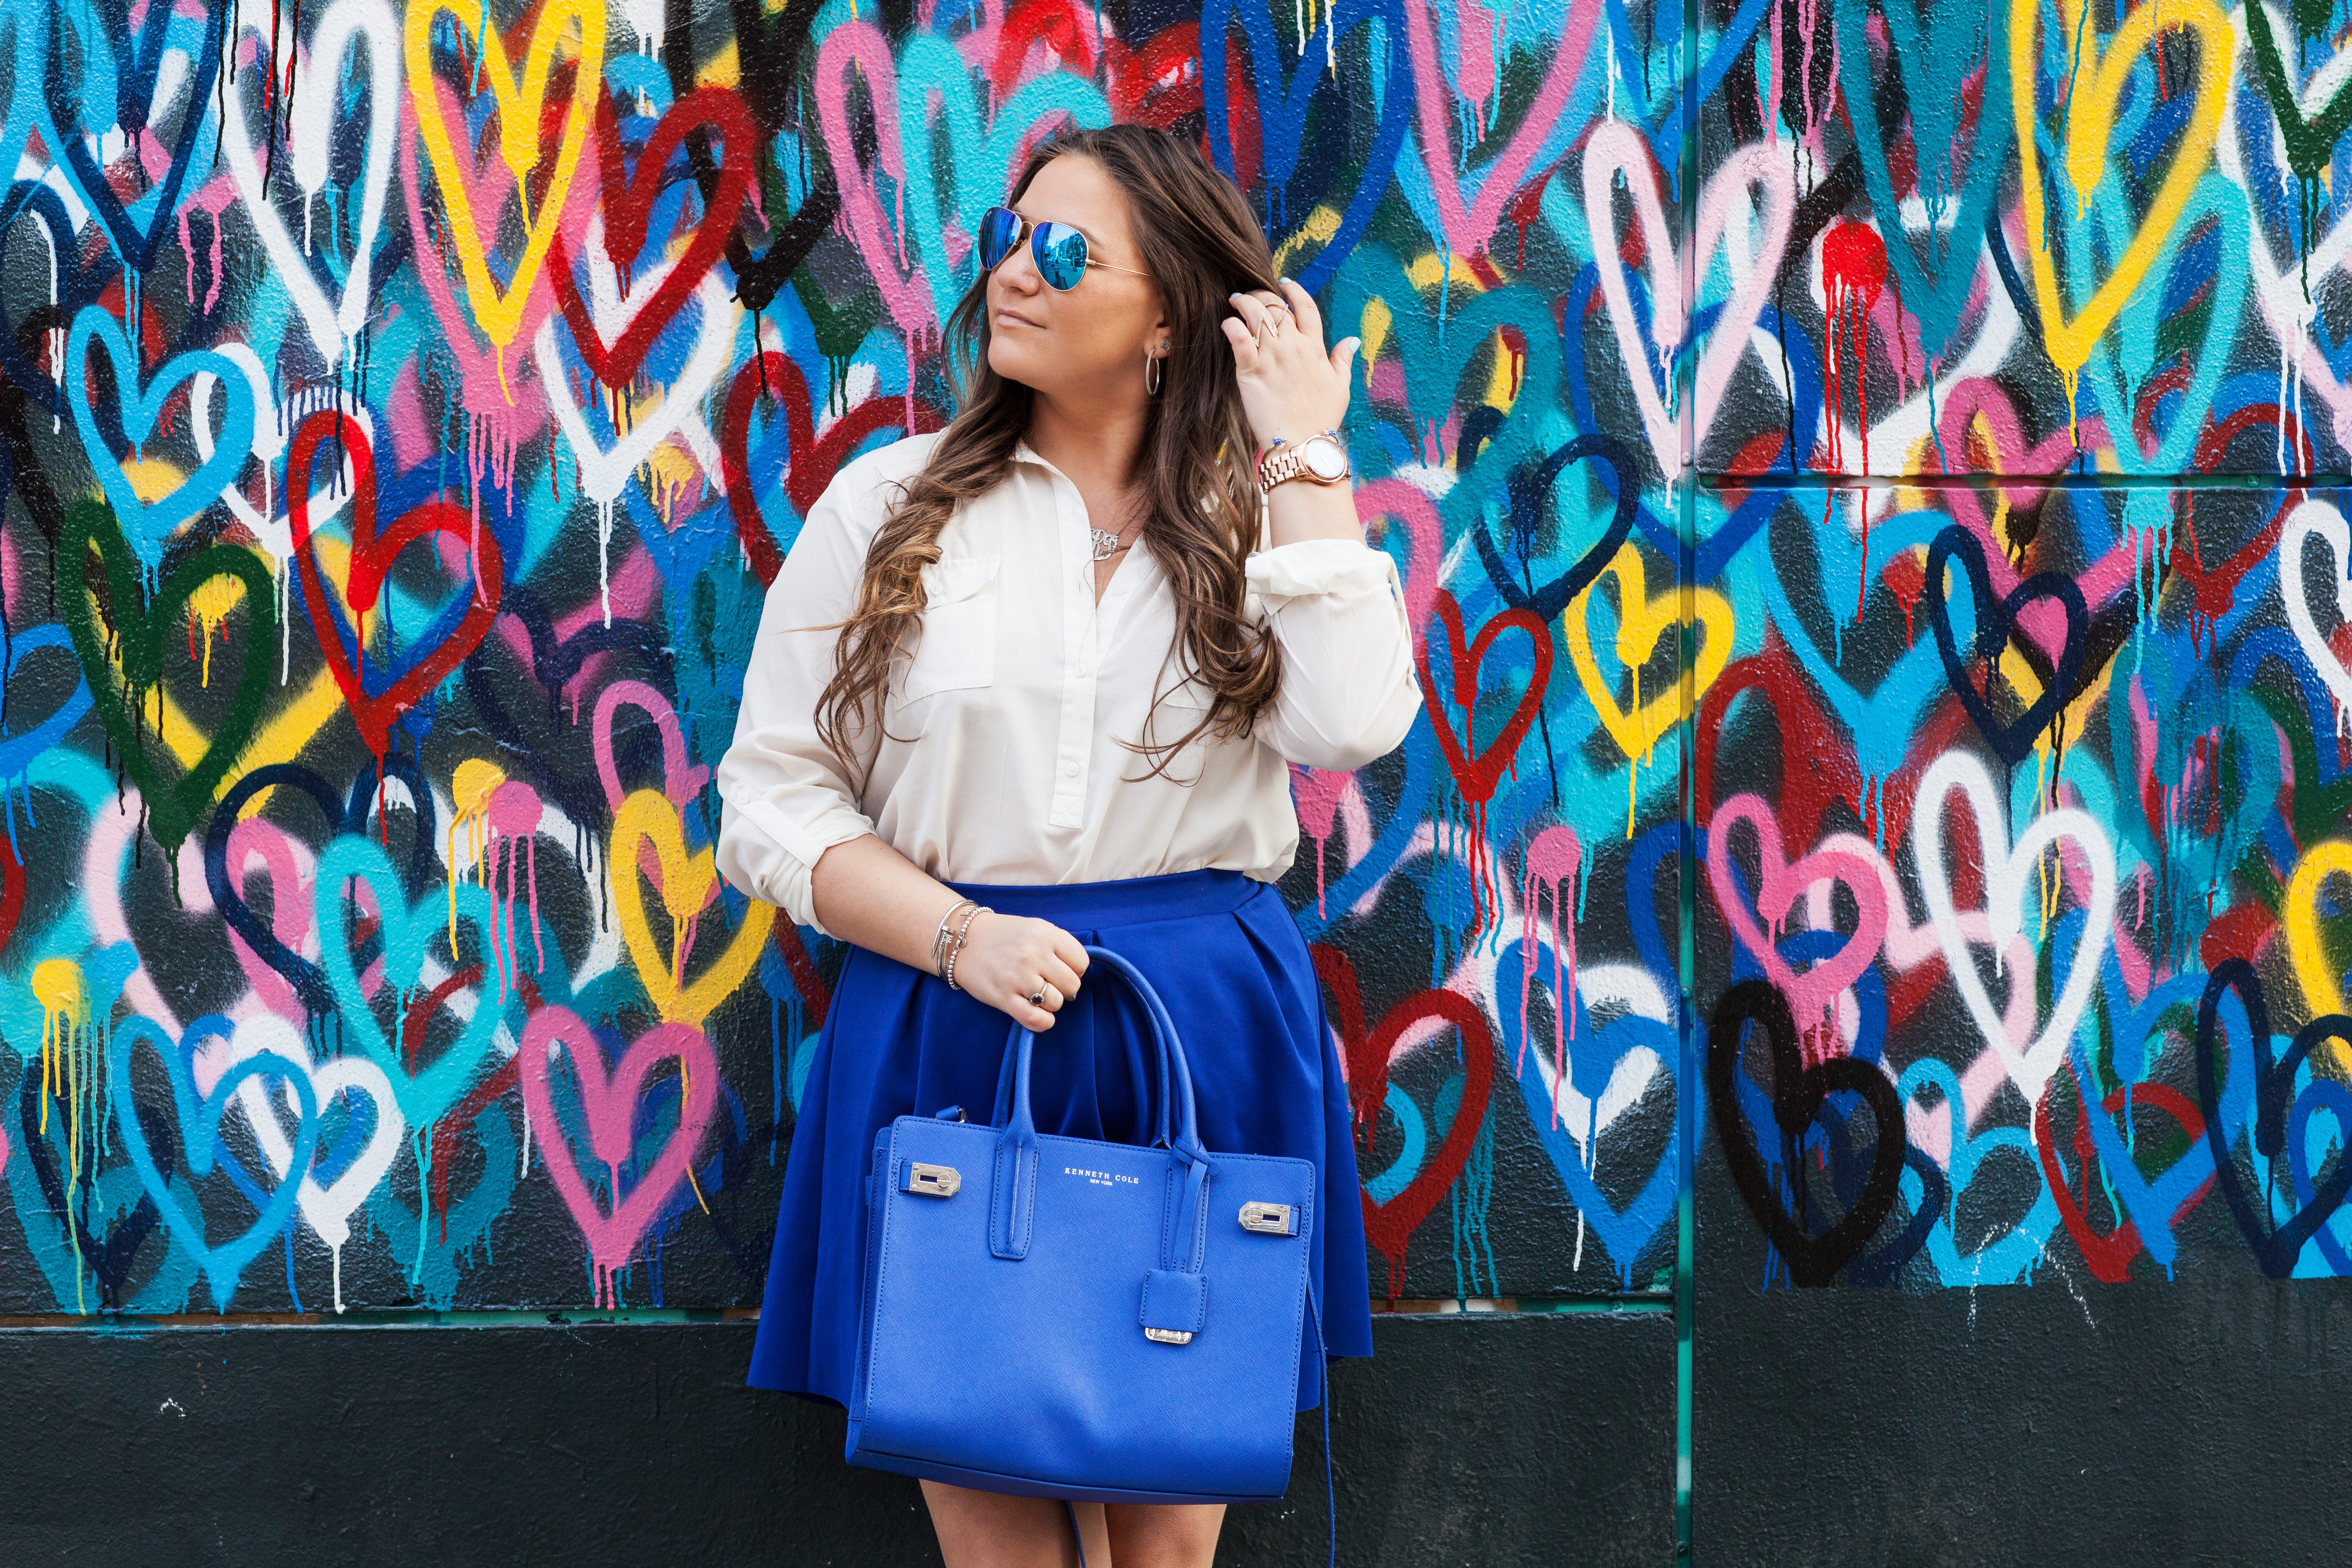 melissatierney, missyonmadison, nyc, heartwall, lovewall, graffitiart, graffiti, blueskirt, whitebuttondown, bluesatchel, mirroredaviators, whiteanklestrapsandals, raybans, springstyle, spring, streetstyle, ootd, outfitinspo, springcolors, what to wear to work in the spring,